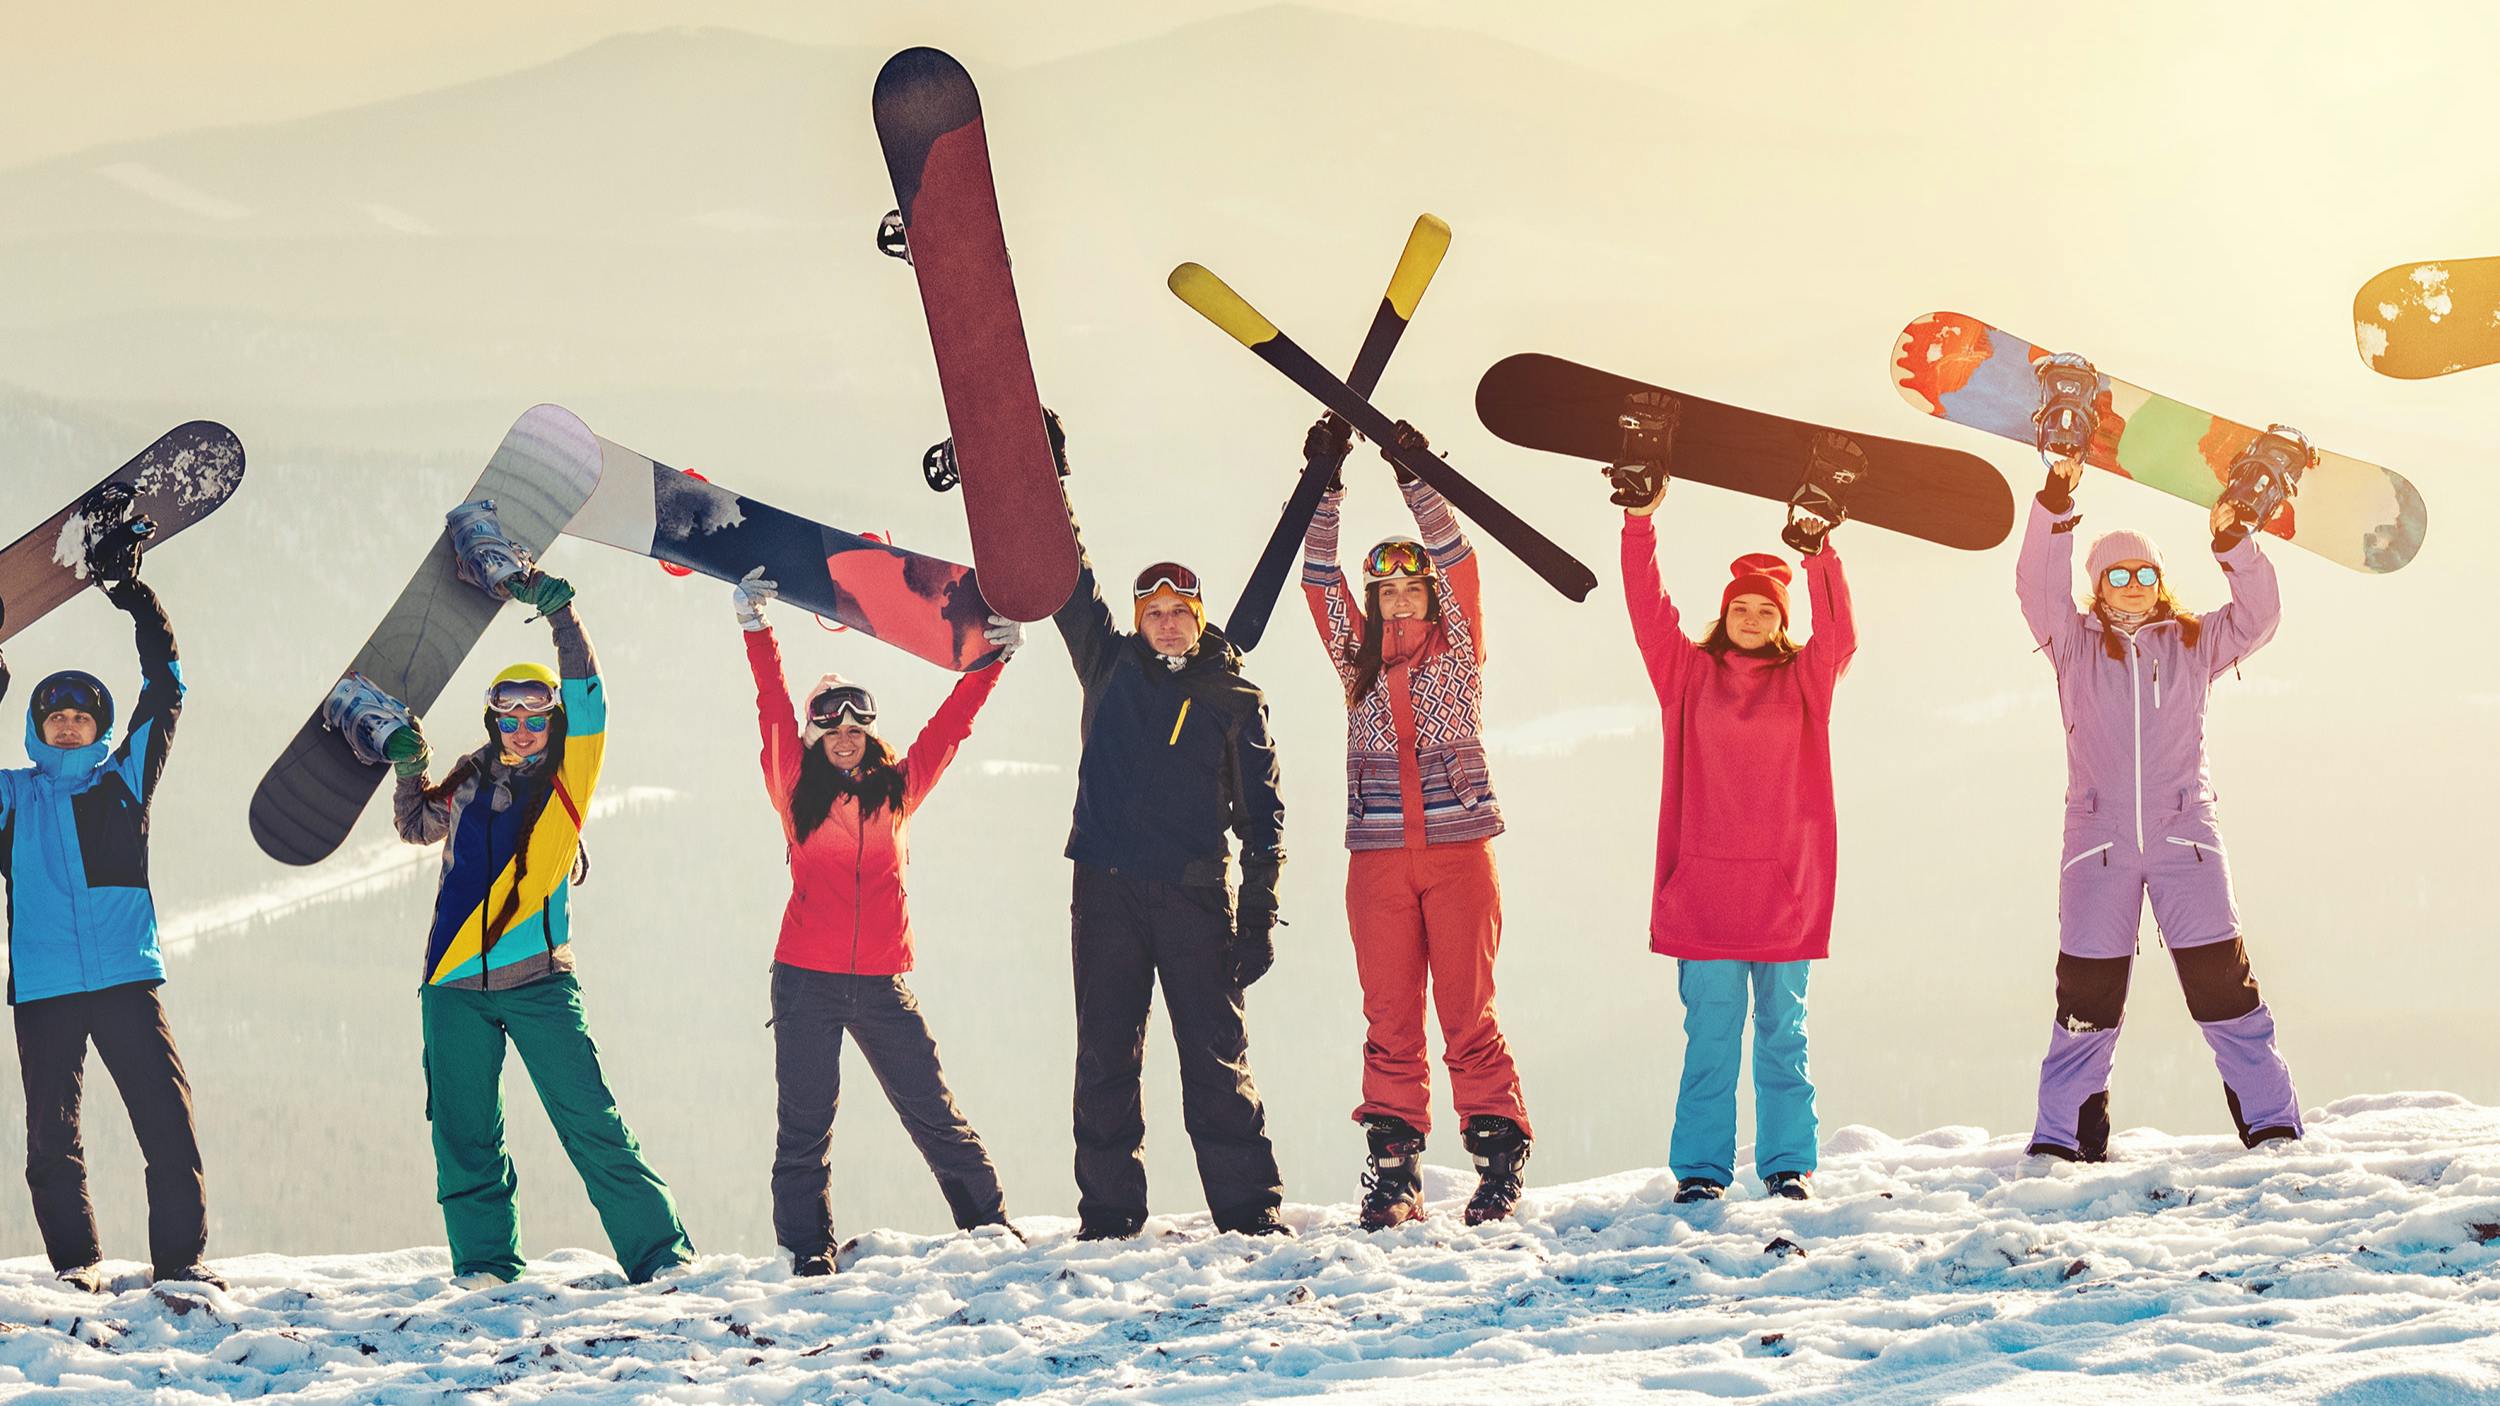 Several snowboarders holding their boards up at the top of a snowy mountain. 